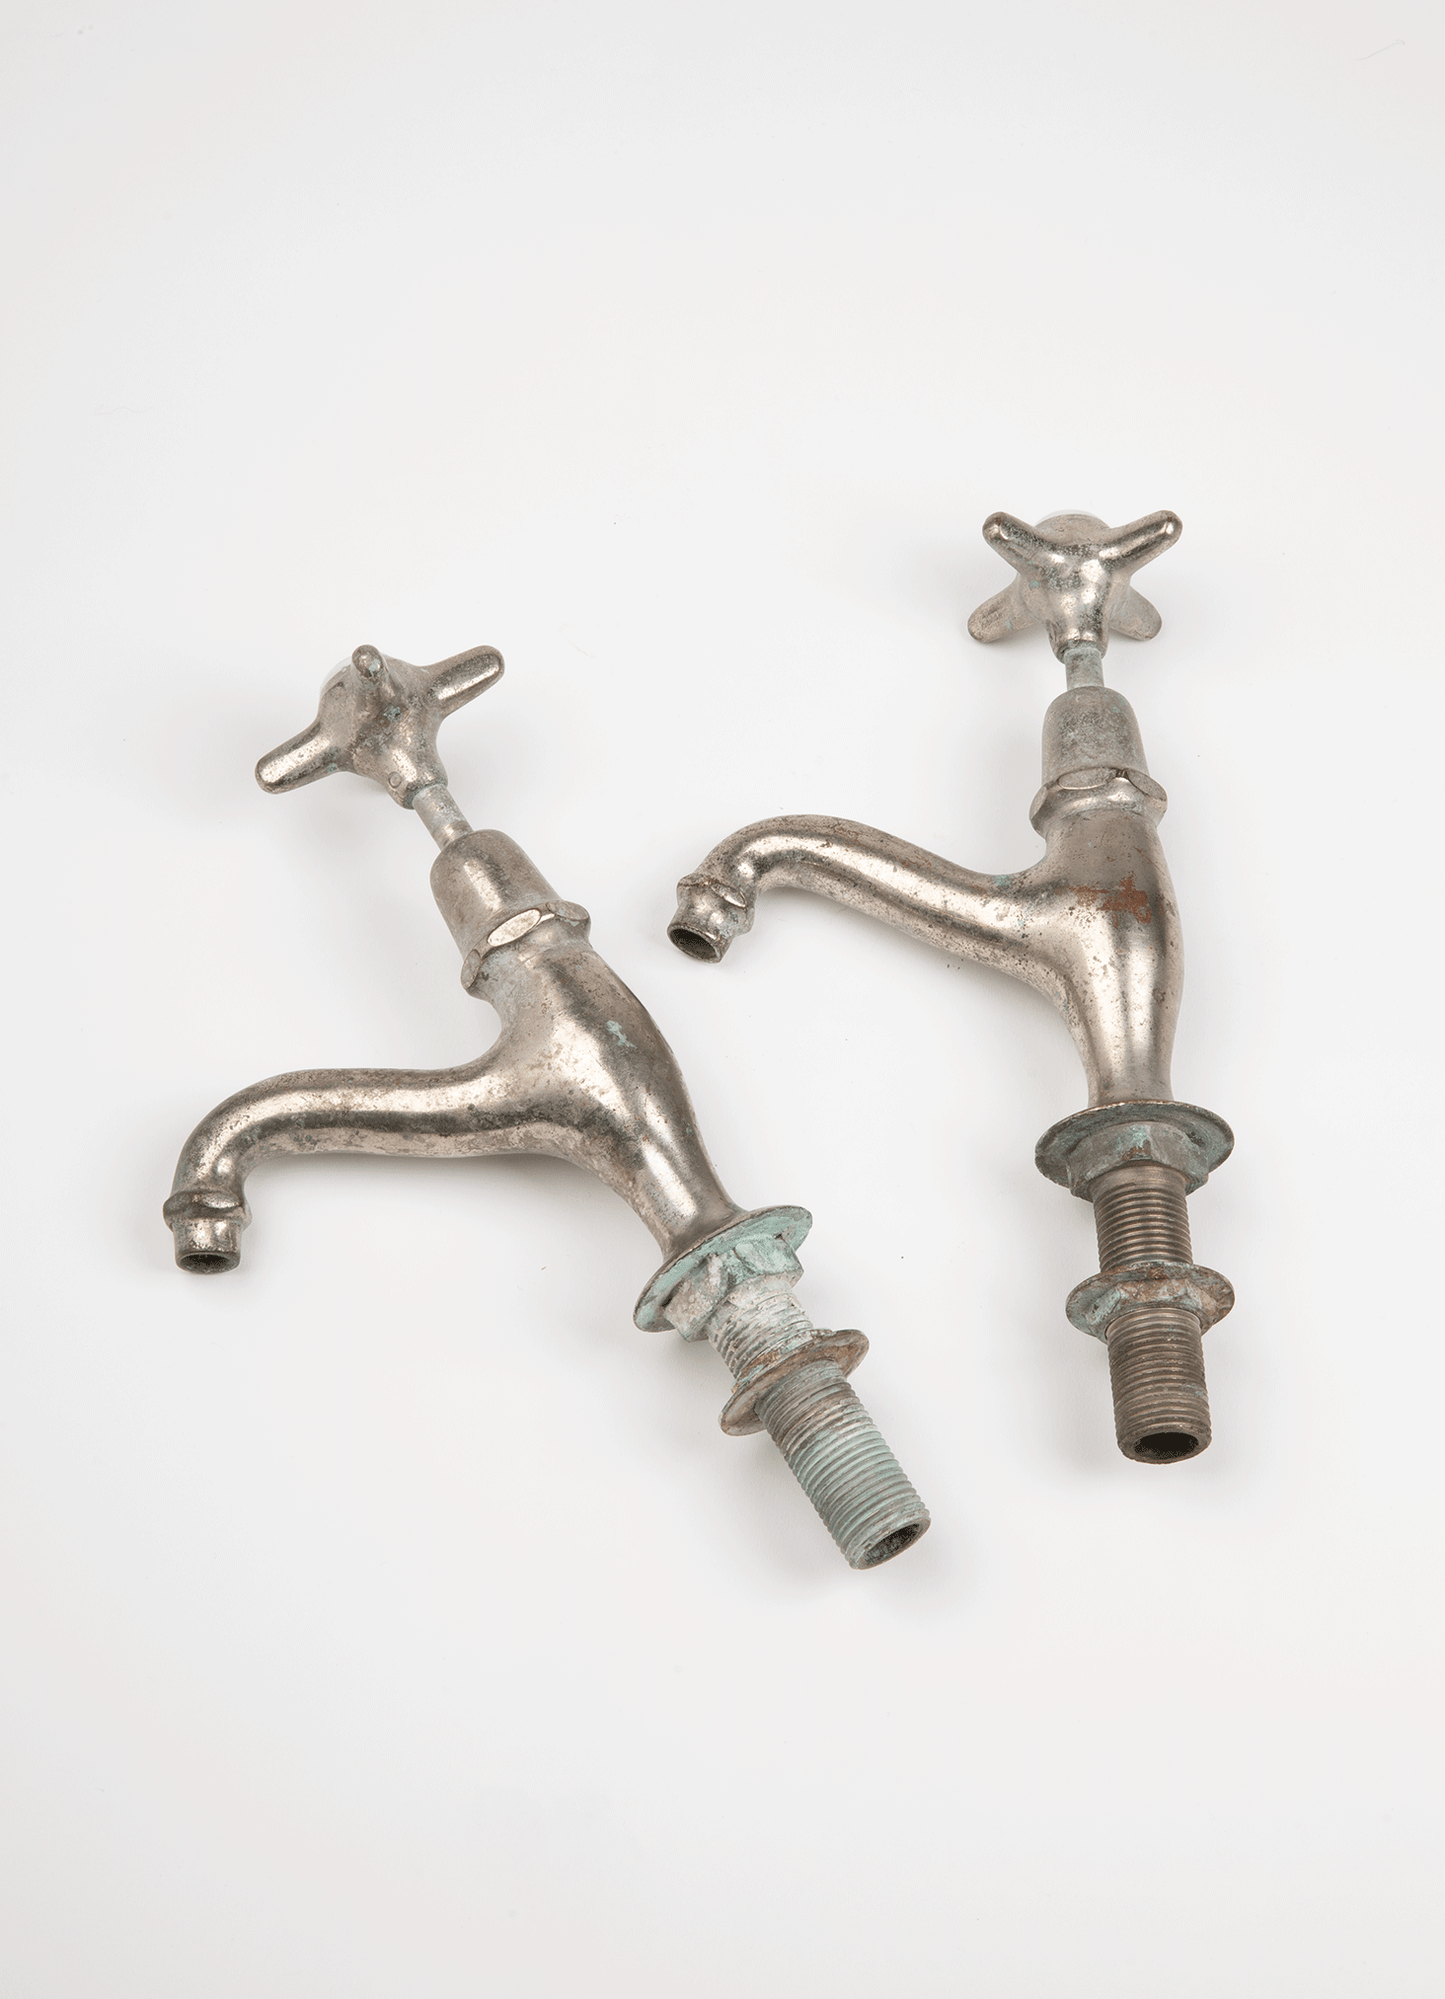 Set of French Vintage Art Deco Bathroom Froid Chaud Faucets